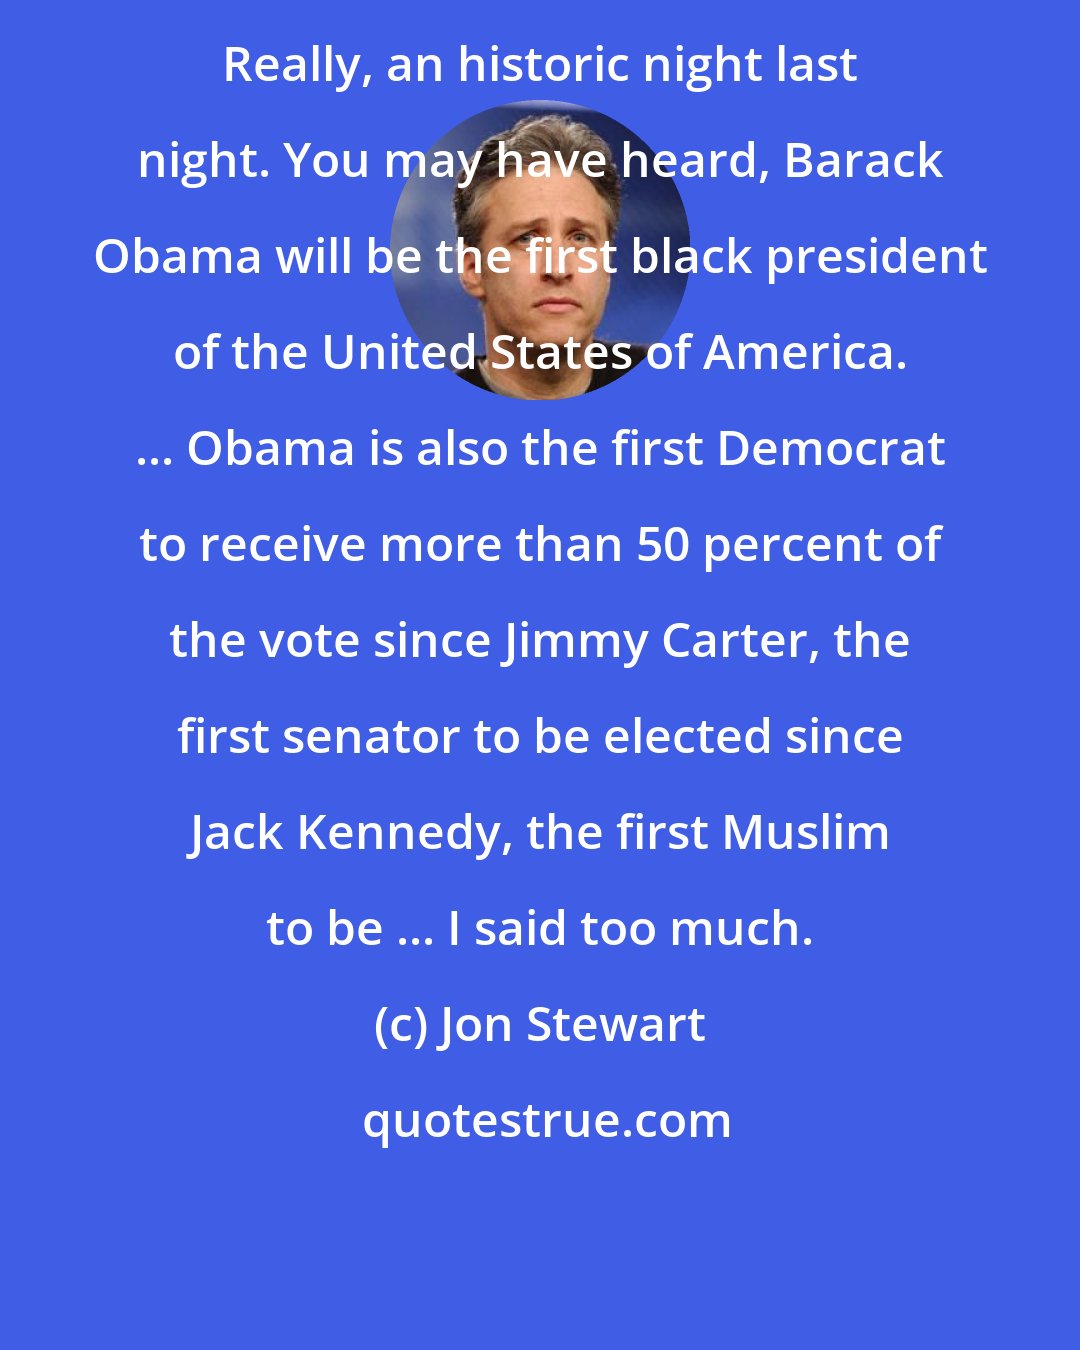 Jon Stewart: Really, an historic night last night. You may have heard, Barack Obama will be the first black president of the United States of America. ... Obama is also the first Democrat to receive more than 50 percent of the vote since Jimmy Carter, the first senator to be elected since Jack Kennedy, the first Muslim to be ... I said too much.